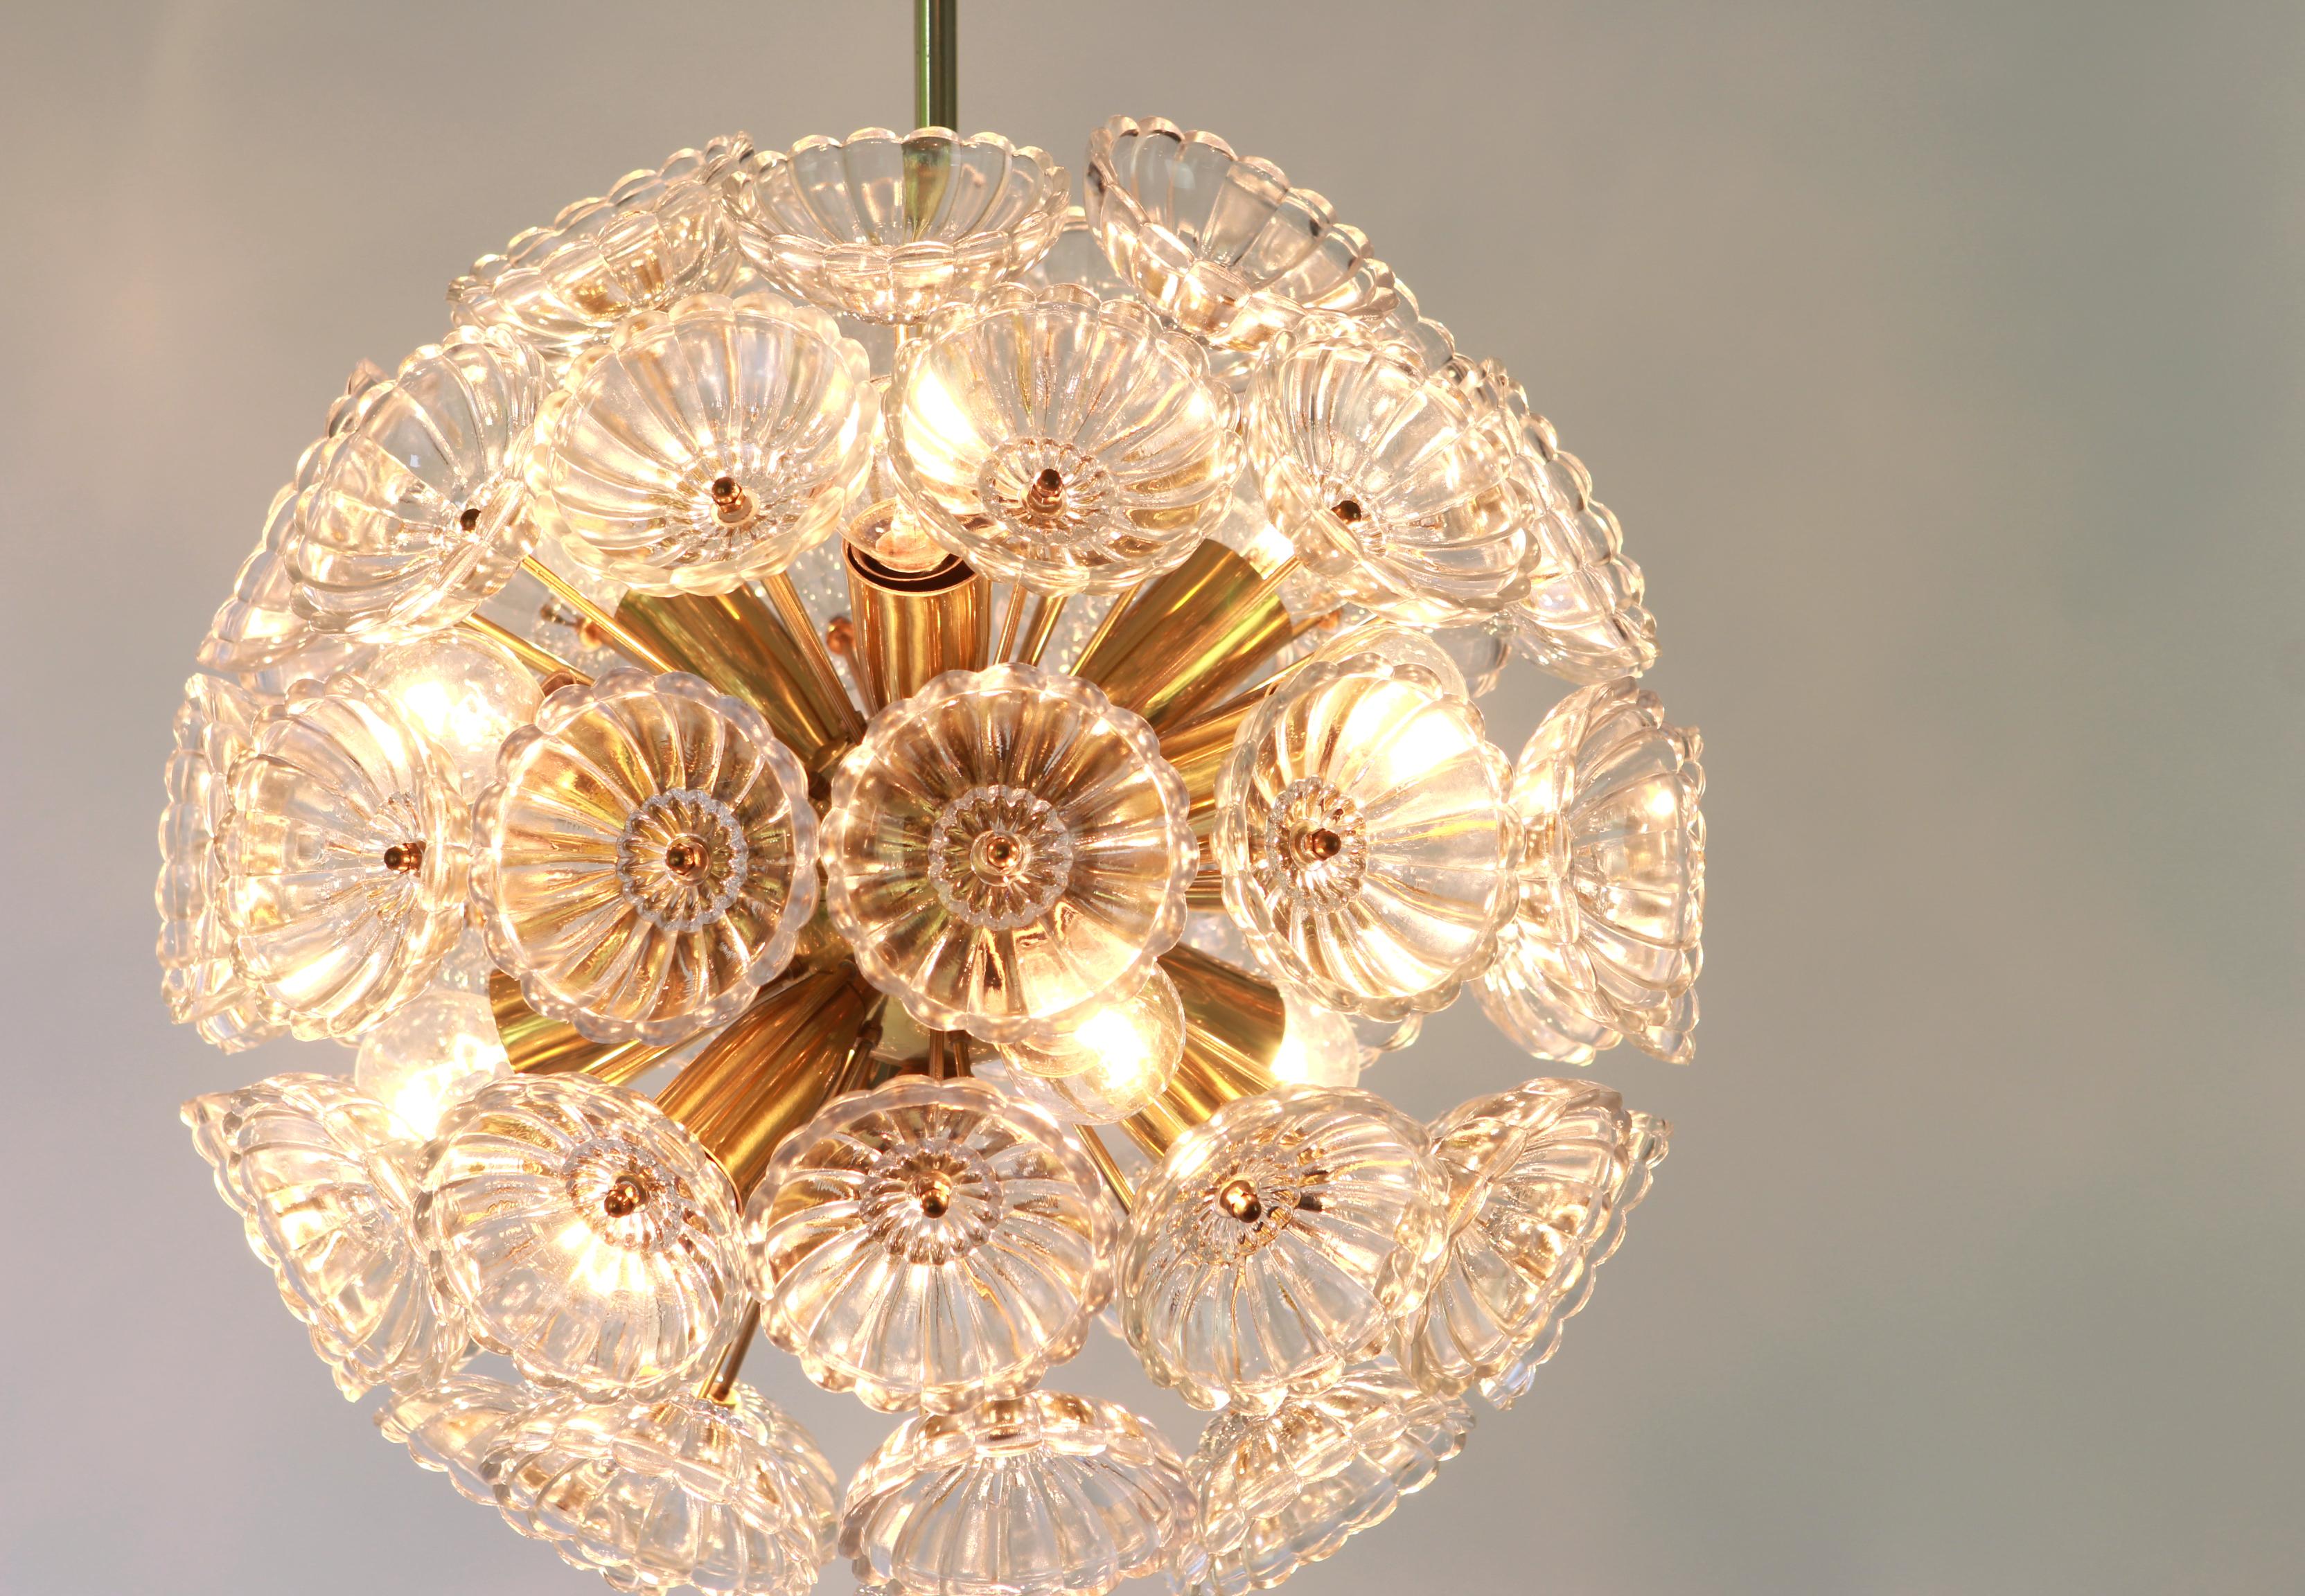 Mid-20th Century 1 of 24 Stunning Floral Glass and Brass Sputnik Chandeliers, Germany, 1960s